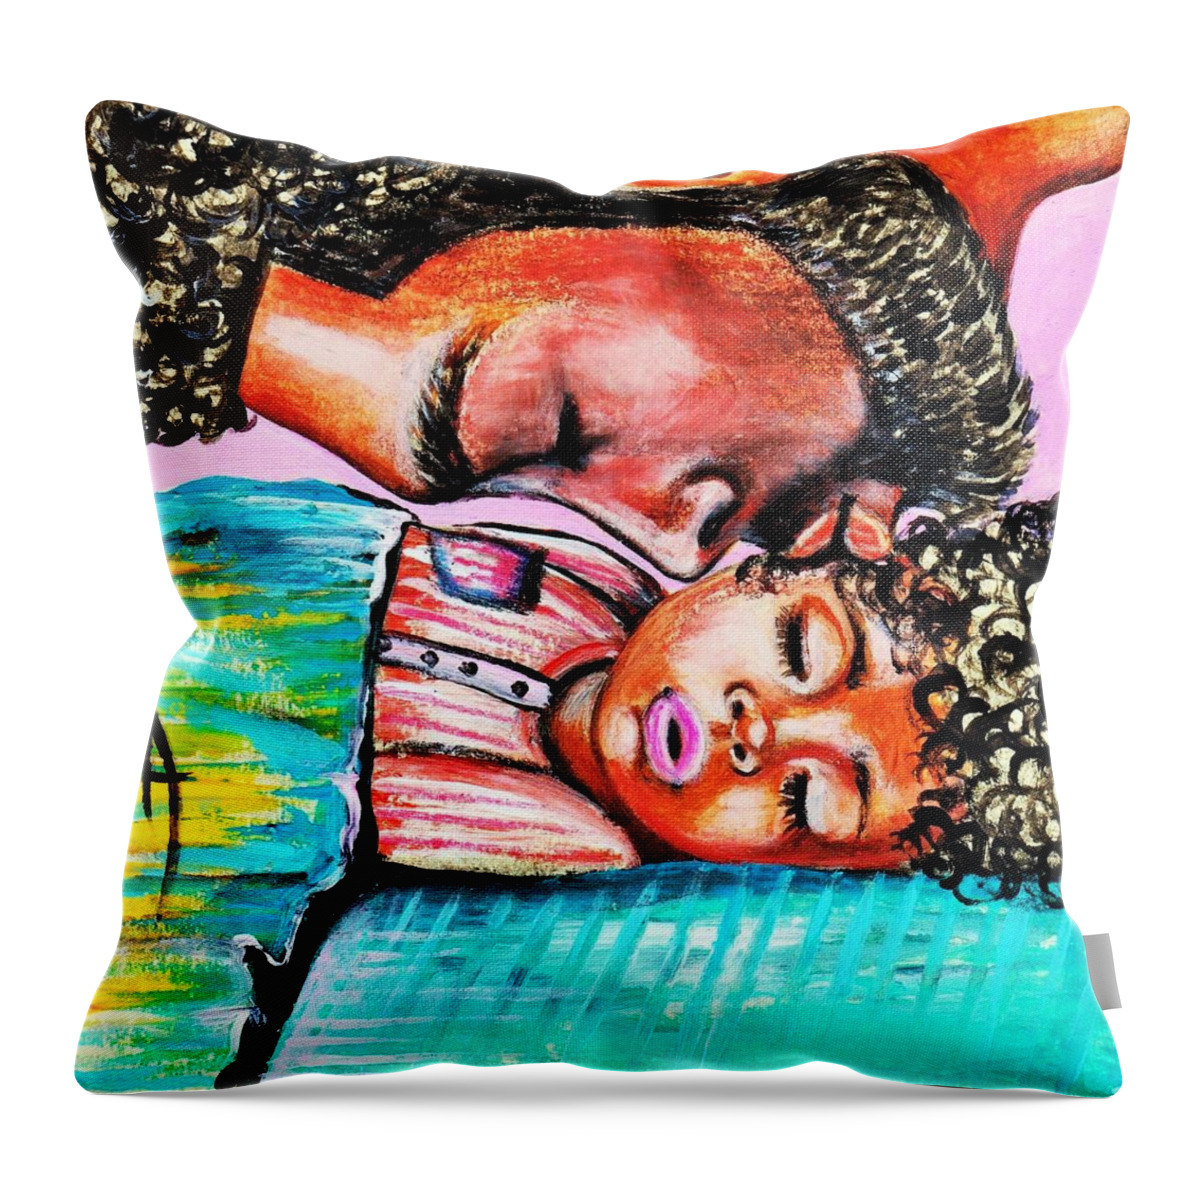 Artbyria Throw Pillow featuring the photograph Goodnight Kiss by Artist RiA